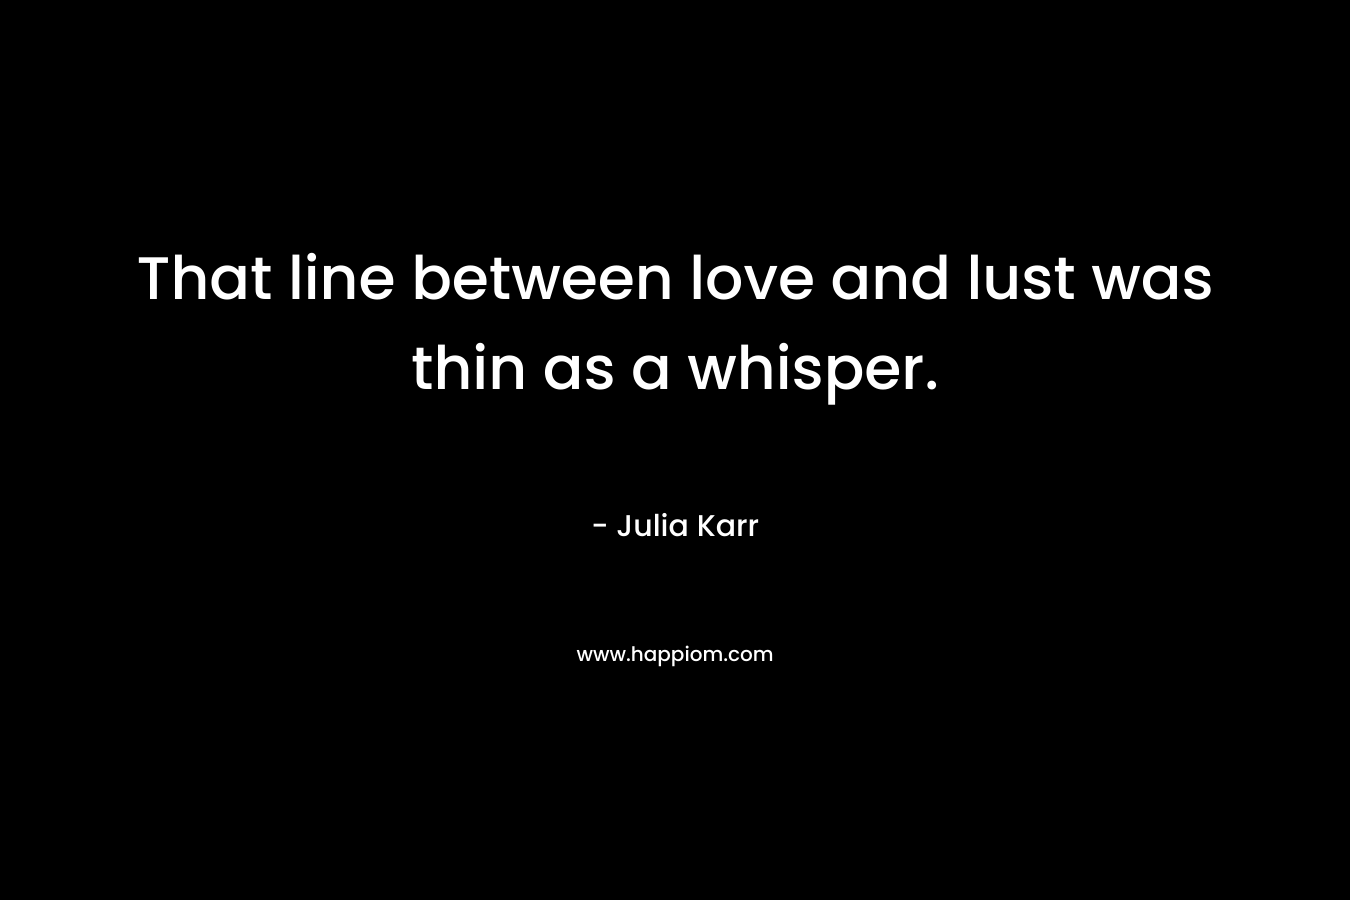 That line between love and lust was thin as a whisper. – Julia Karr